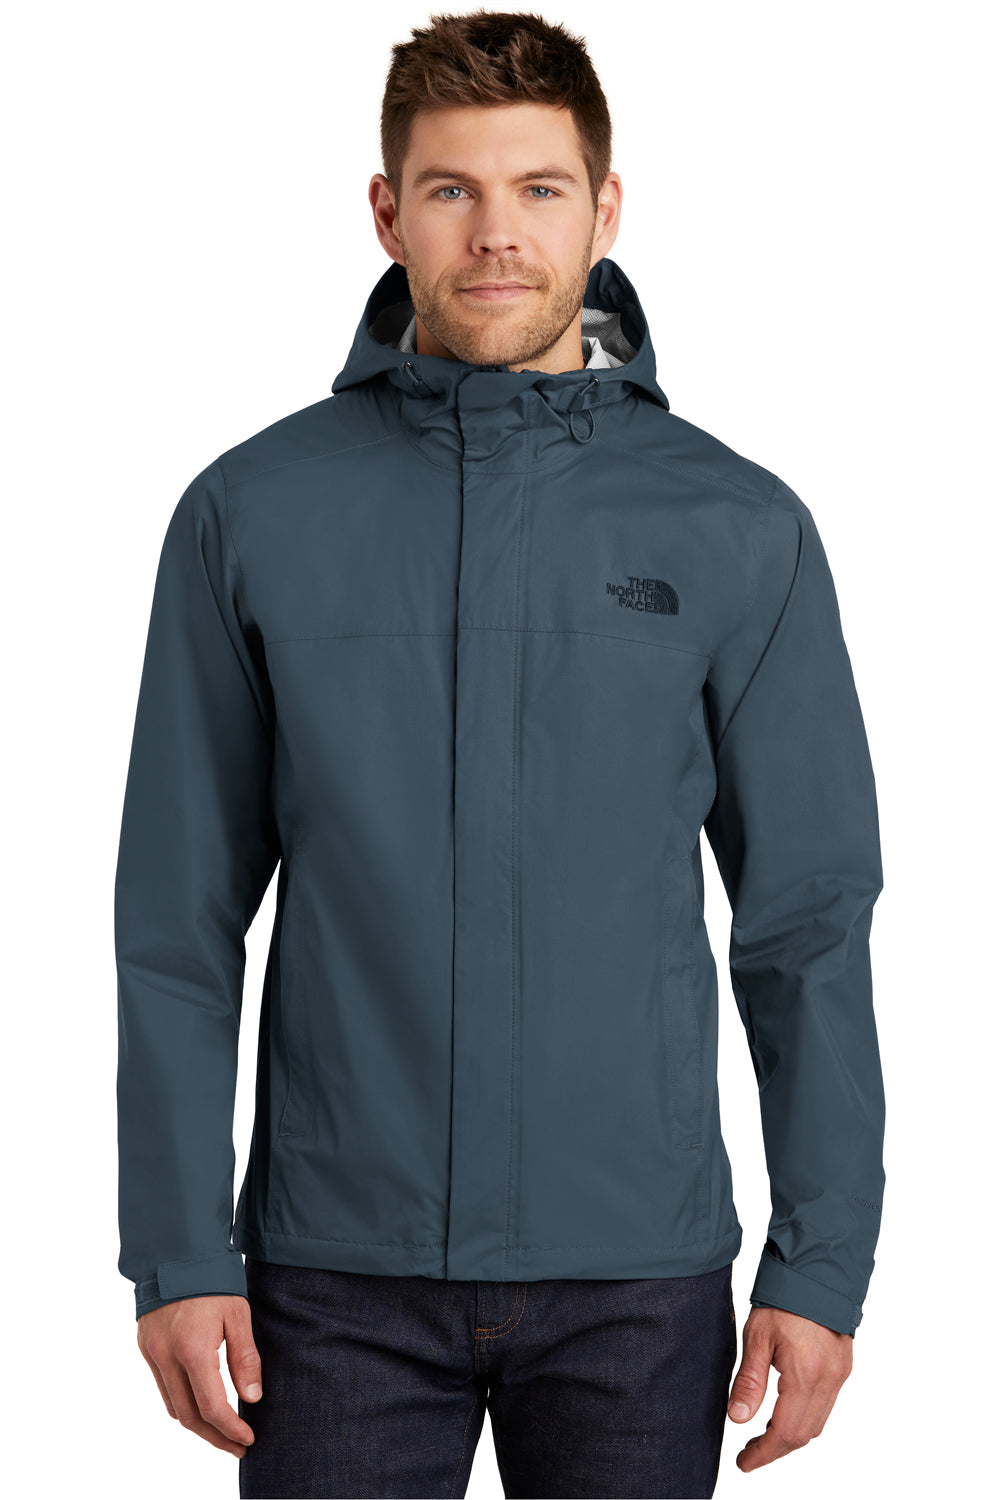 The North Face NF0A3LH4 Mens DryVent Waterproof Full Zip Hooded Jacket Shady Blue Front